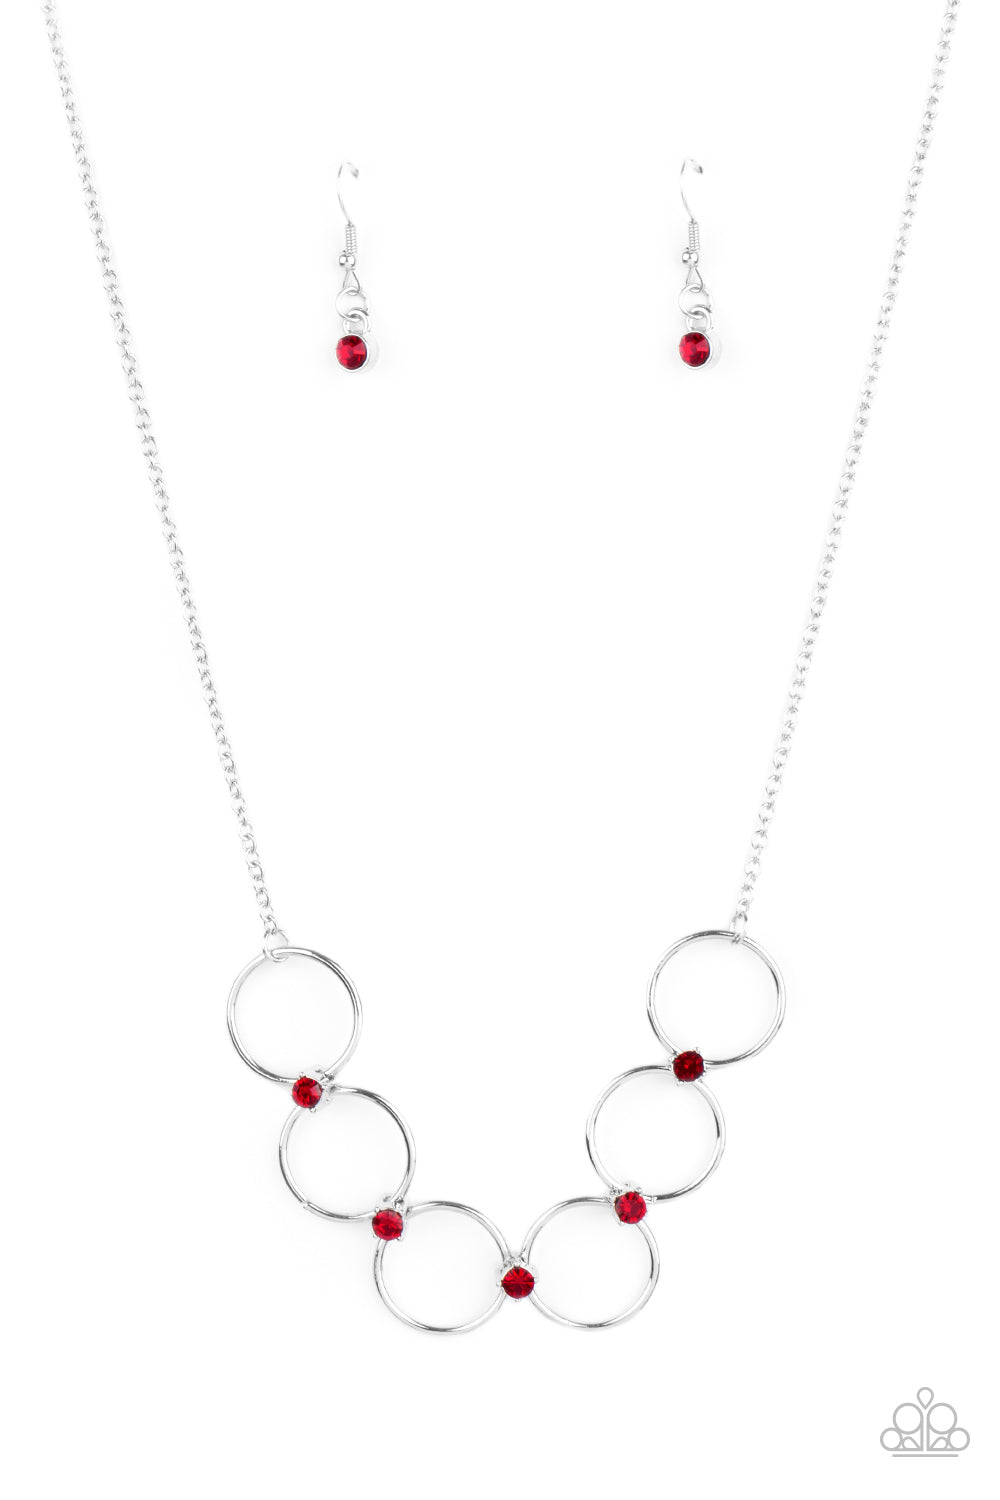 Regal Society - Red Dainty Rhinestones & Silver Linked Rings Paparazzi Necklace & matching earrings